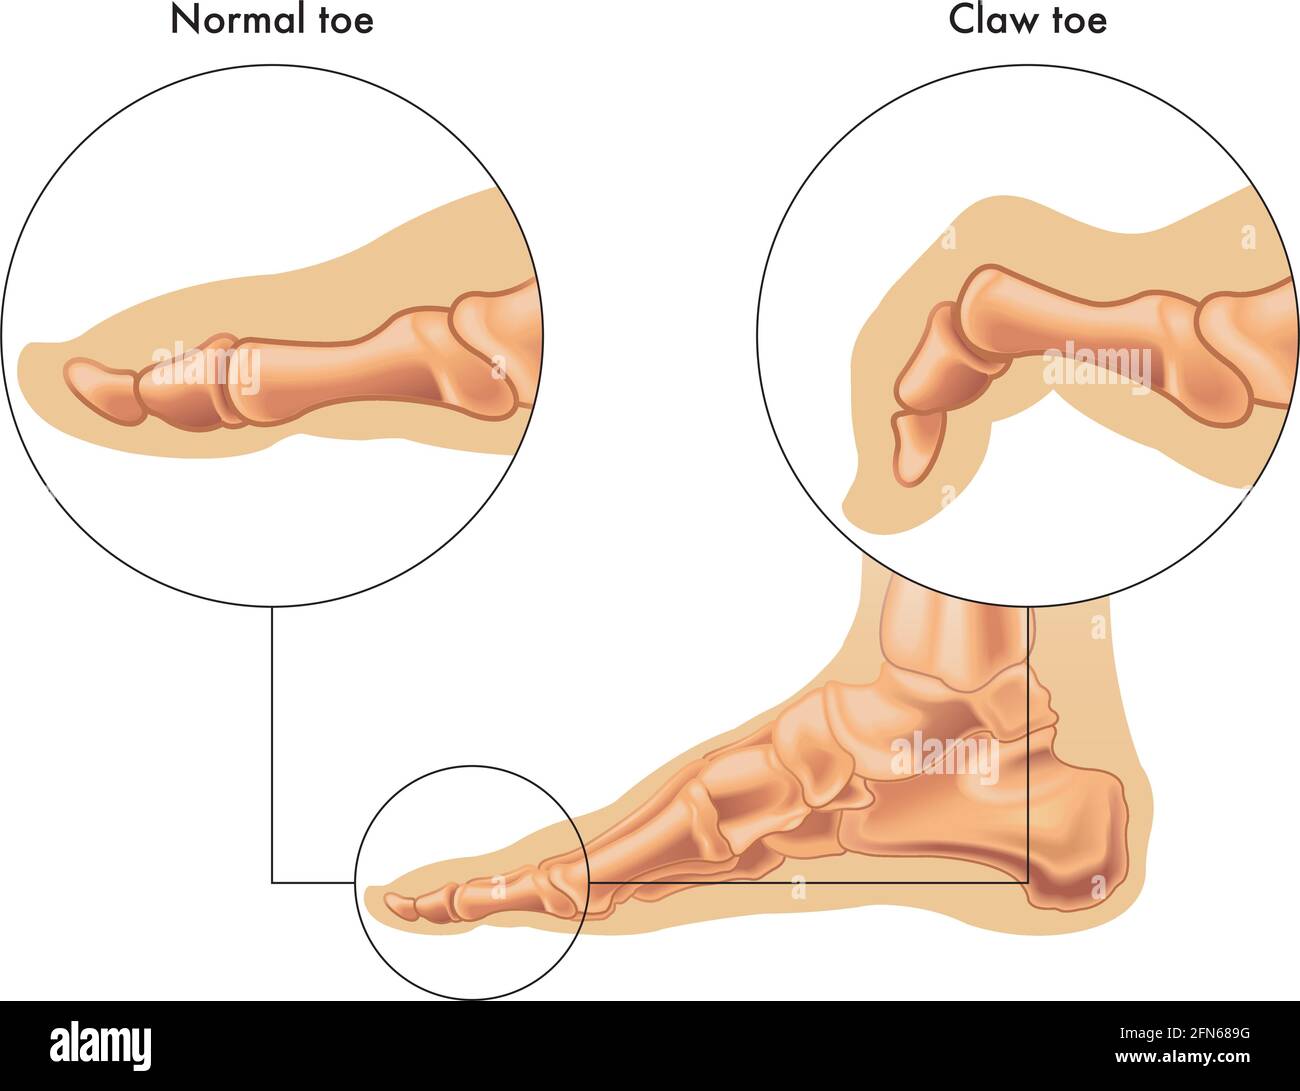 Medical illustration shows the difference between a normal toe and a claw toe, with annotations. Stock Vector